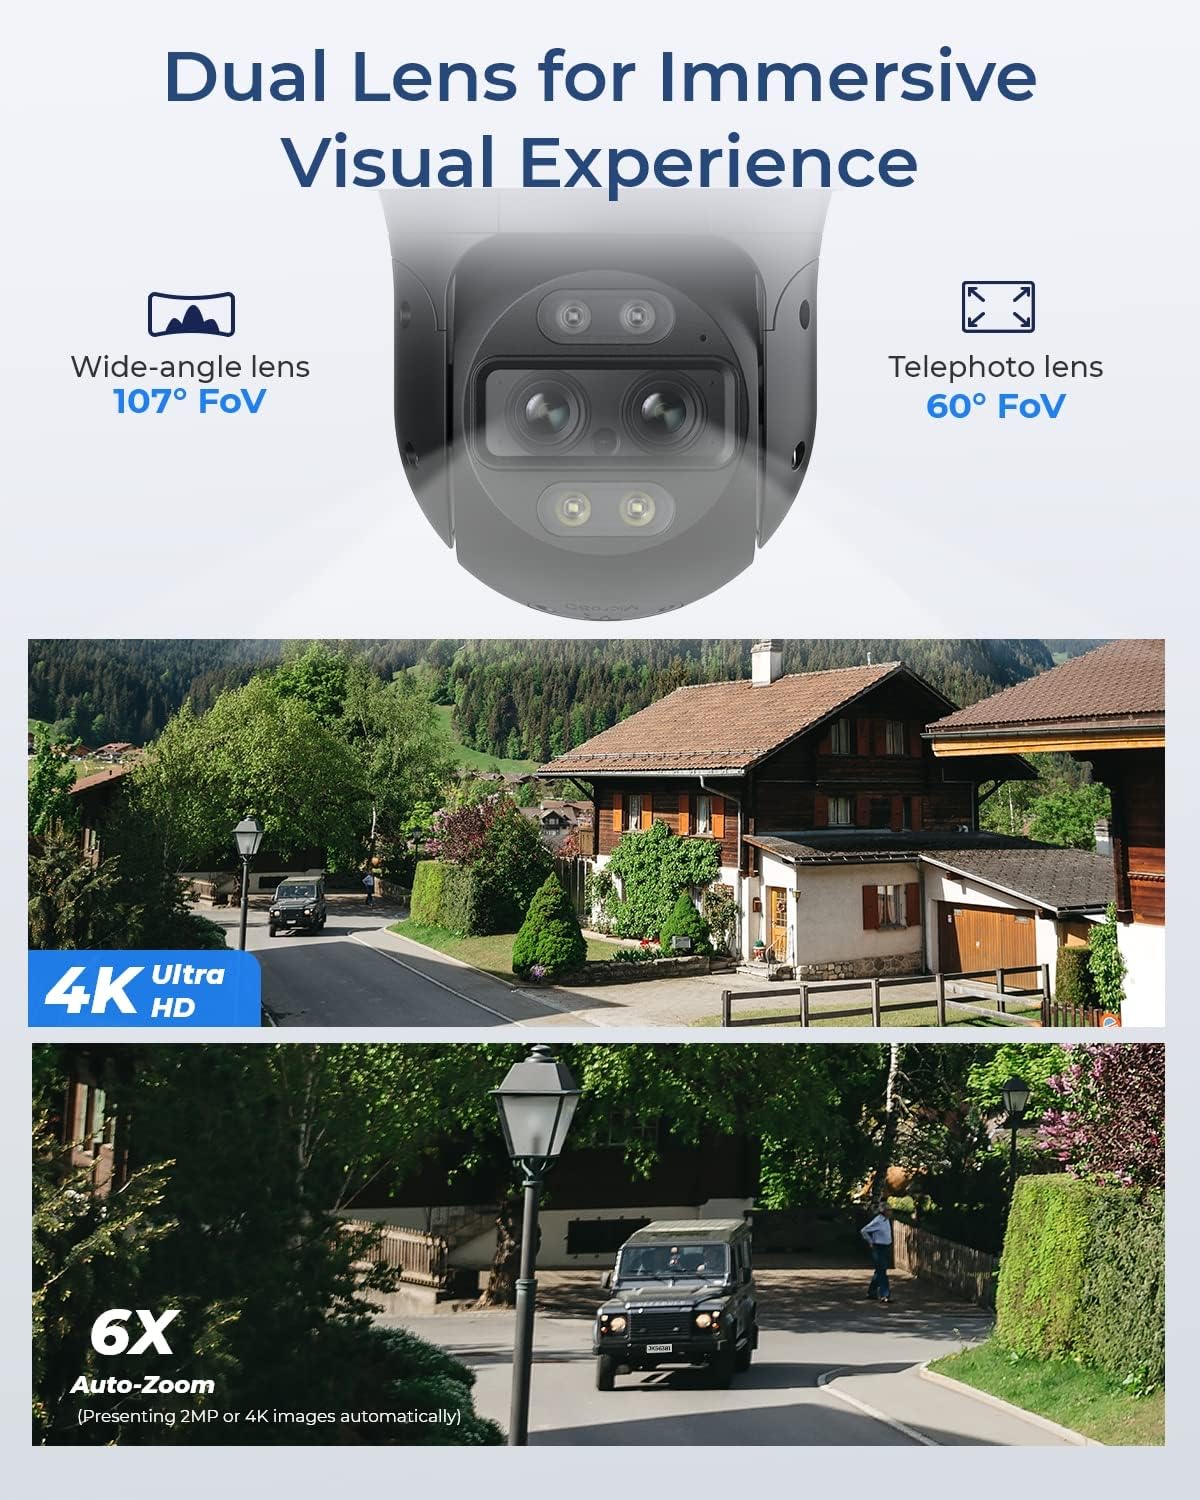 Trackmix Wi-Fi Battery Camera: 4MP - 15fps, Dual Lens 96° + 38°, Night Vision Range up to 15m, Built-in Microphone and Speaker, Motion Detection with Human and Vehicle Detection, Auto-Tracking Feature, Wi-Fi Connectivity, Free Mobile App Included - Spy-shop.com